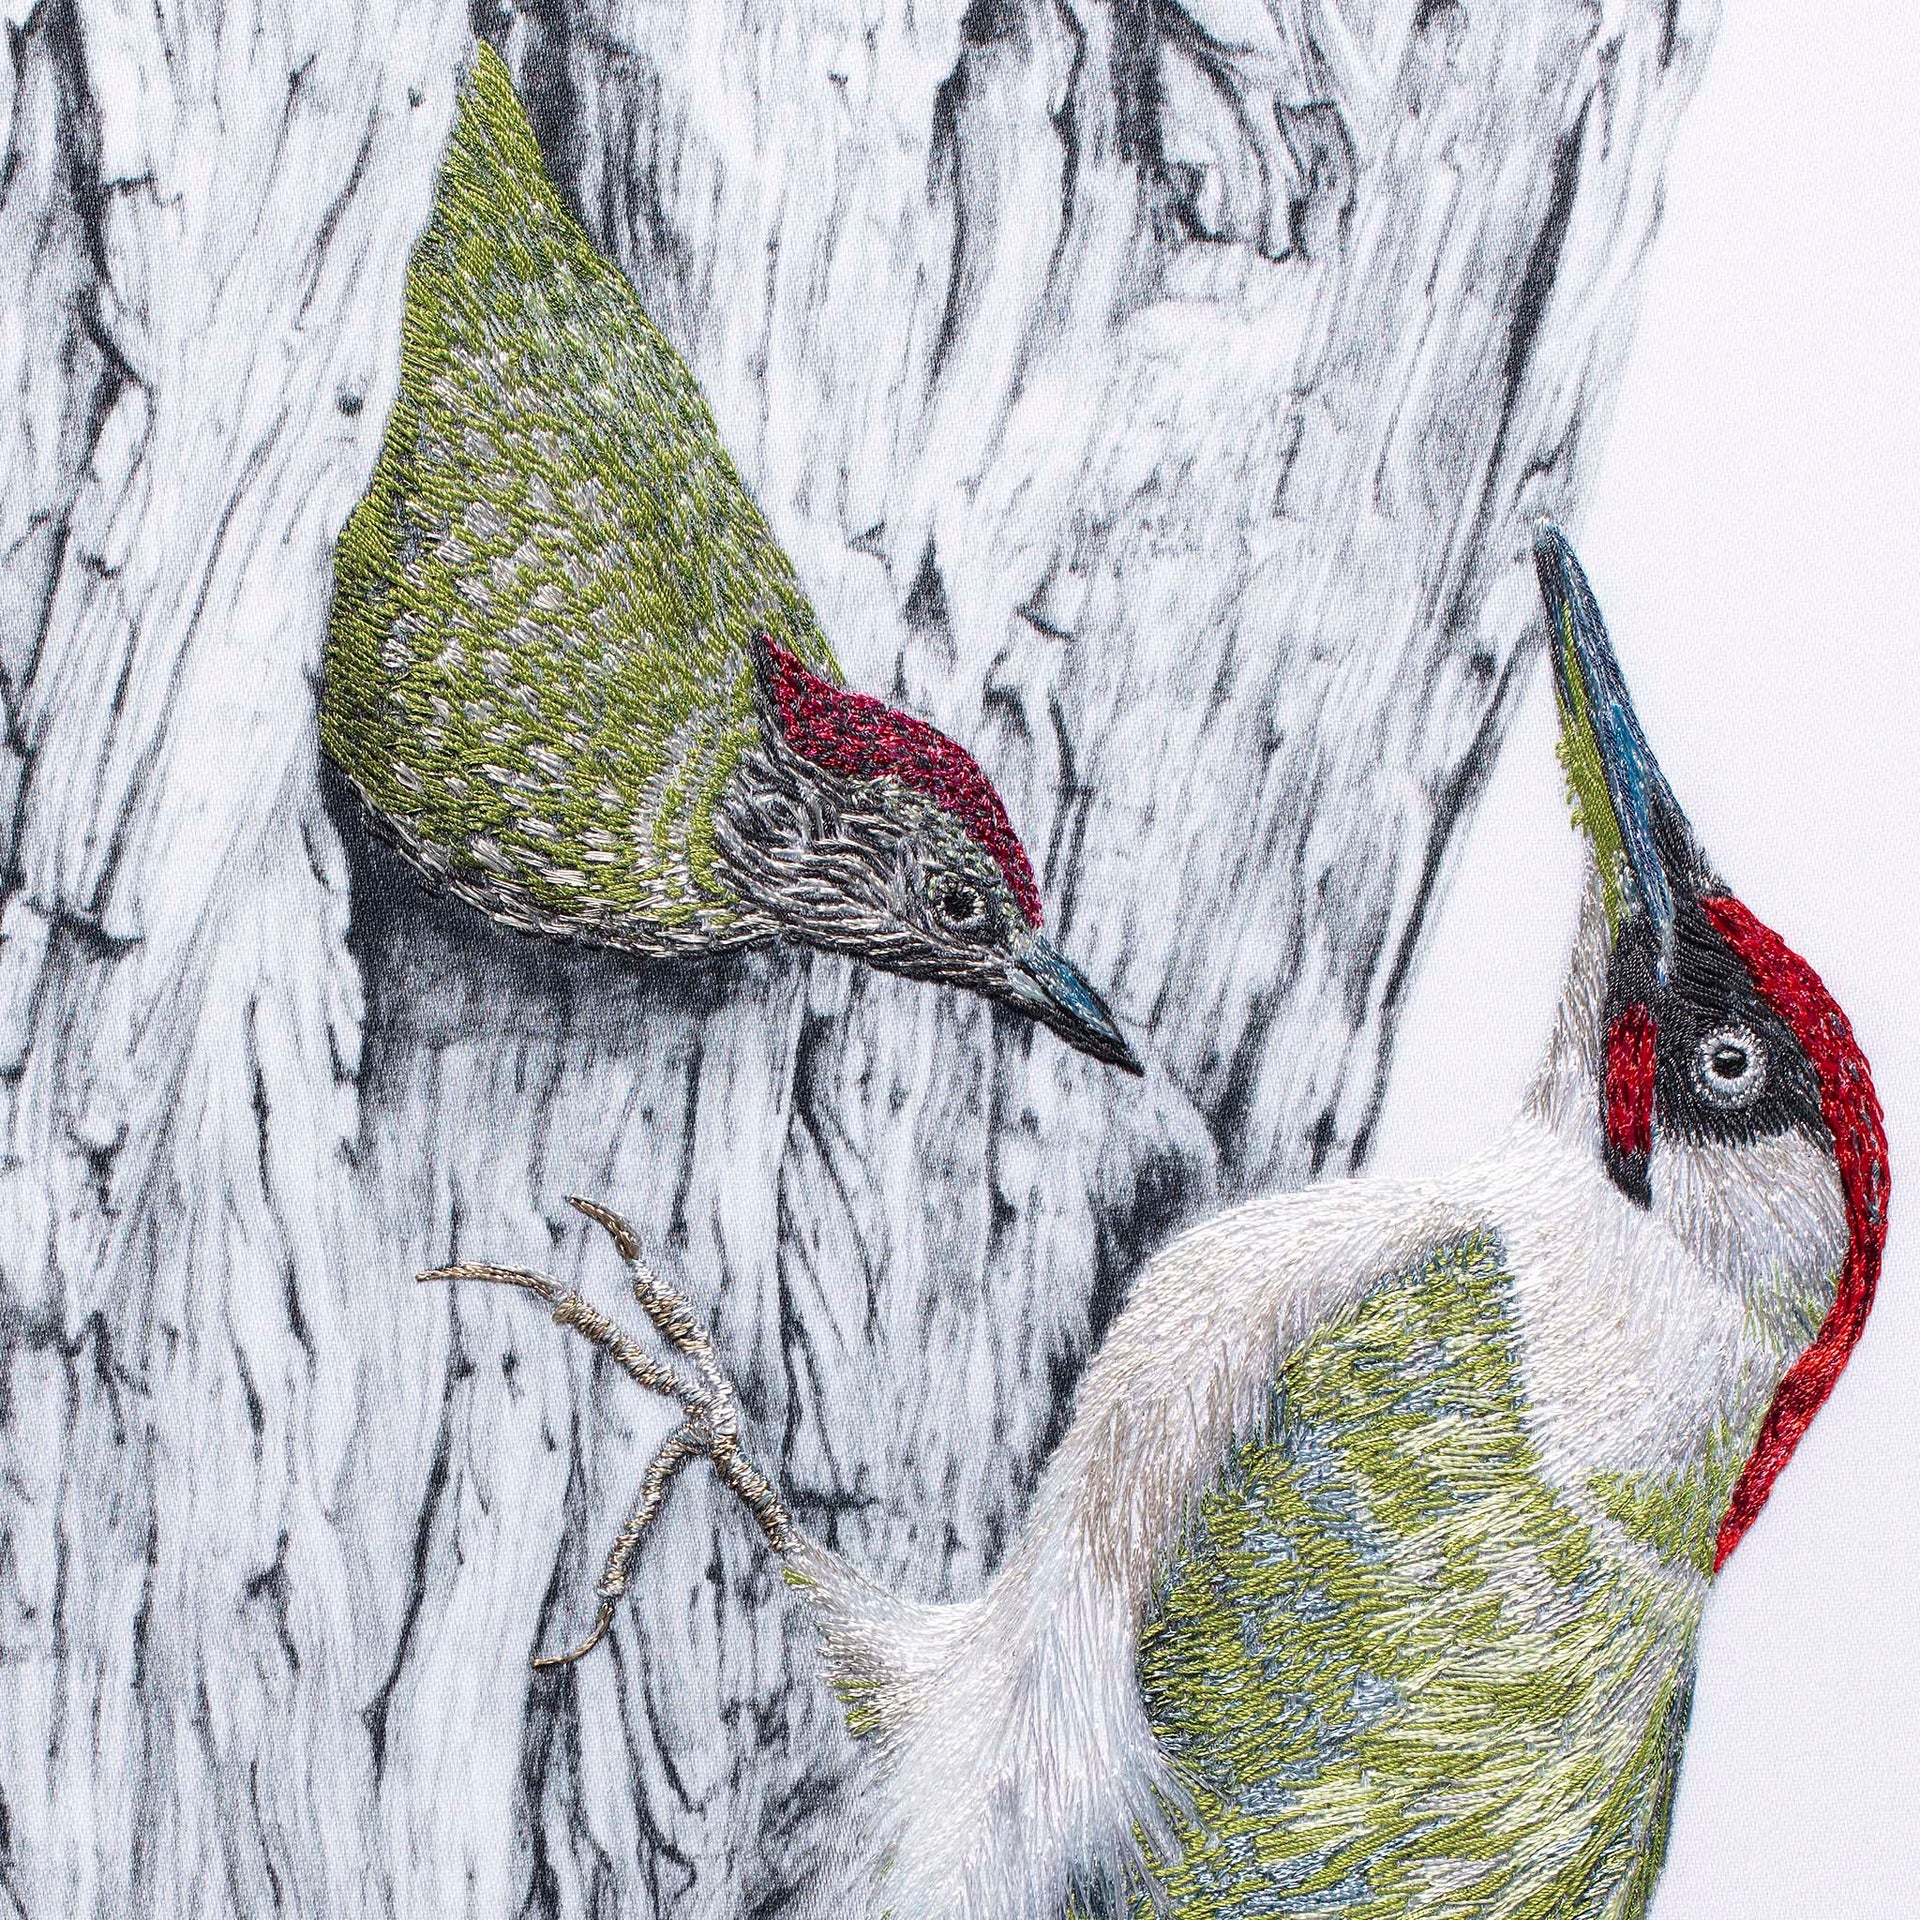 Pencil drawing with hand embroidery Woodpecker artwork close up